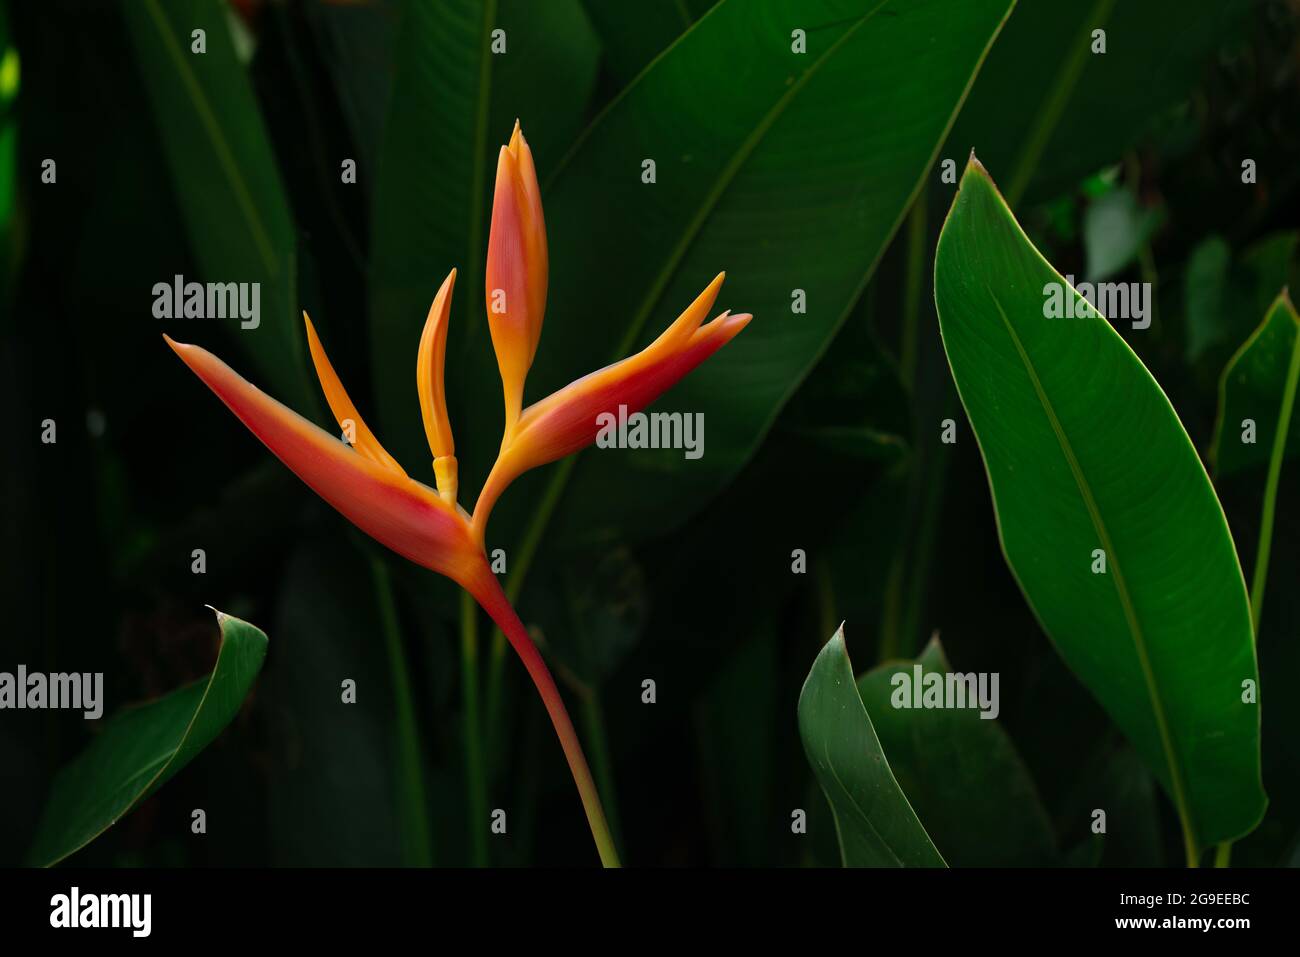 Orange tropical exotic flowers blooming on lush leaf, dark green nature background. Stock Photo